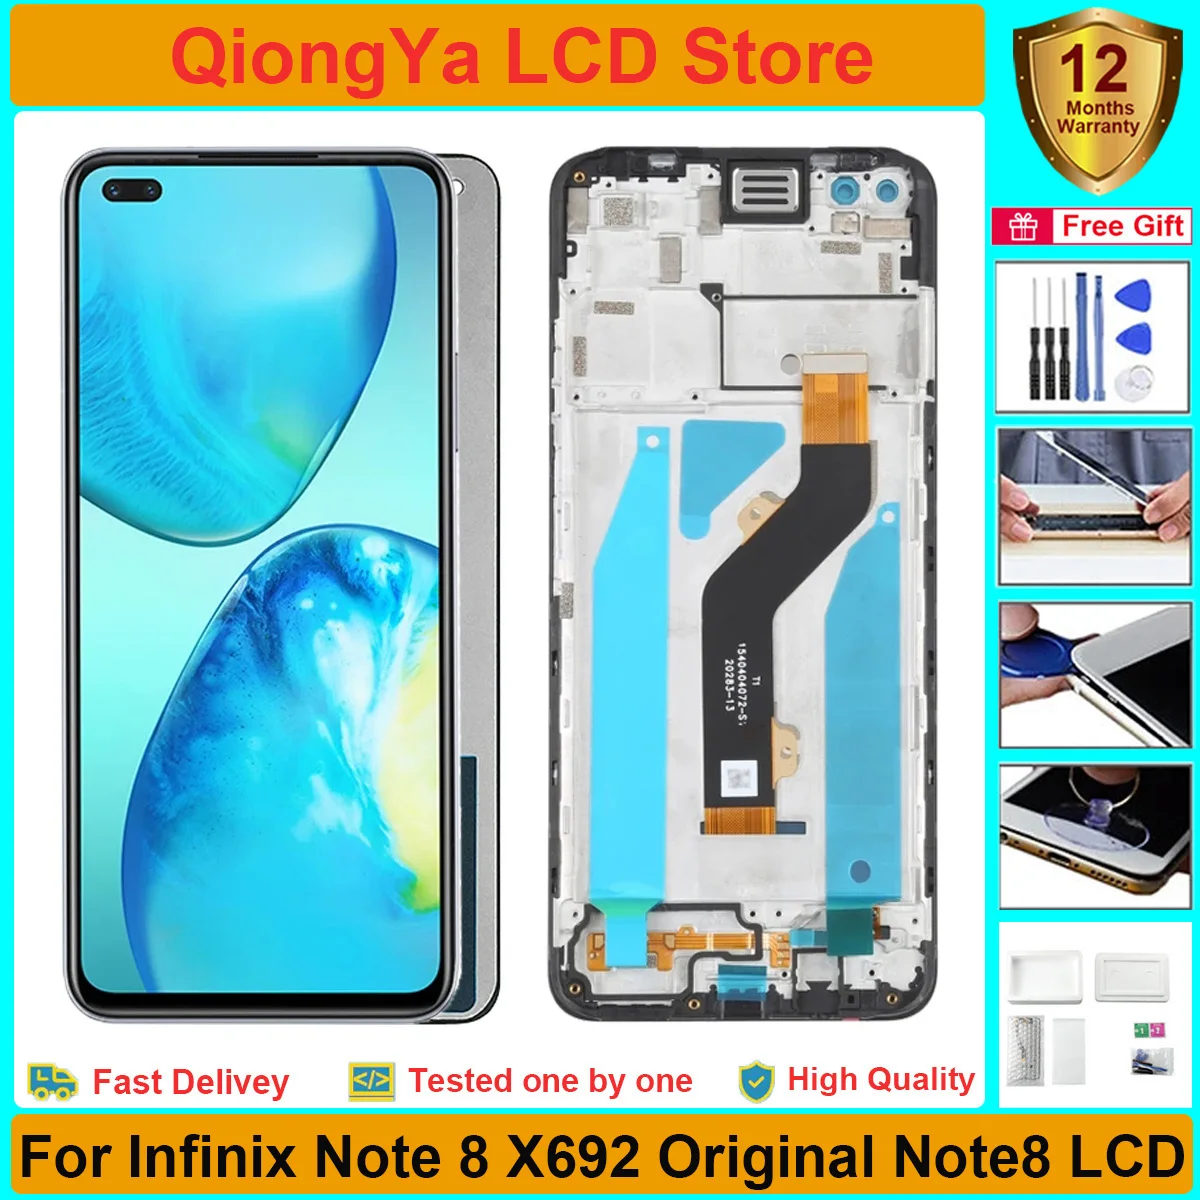 

6.95" Full New Original note8 Display For Infinix Note 8 X692 No Frame LCD with Touch Screen Digitizer Assembly Replacement Part